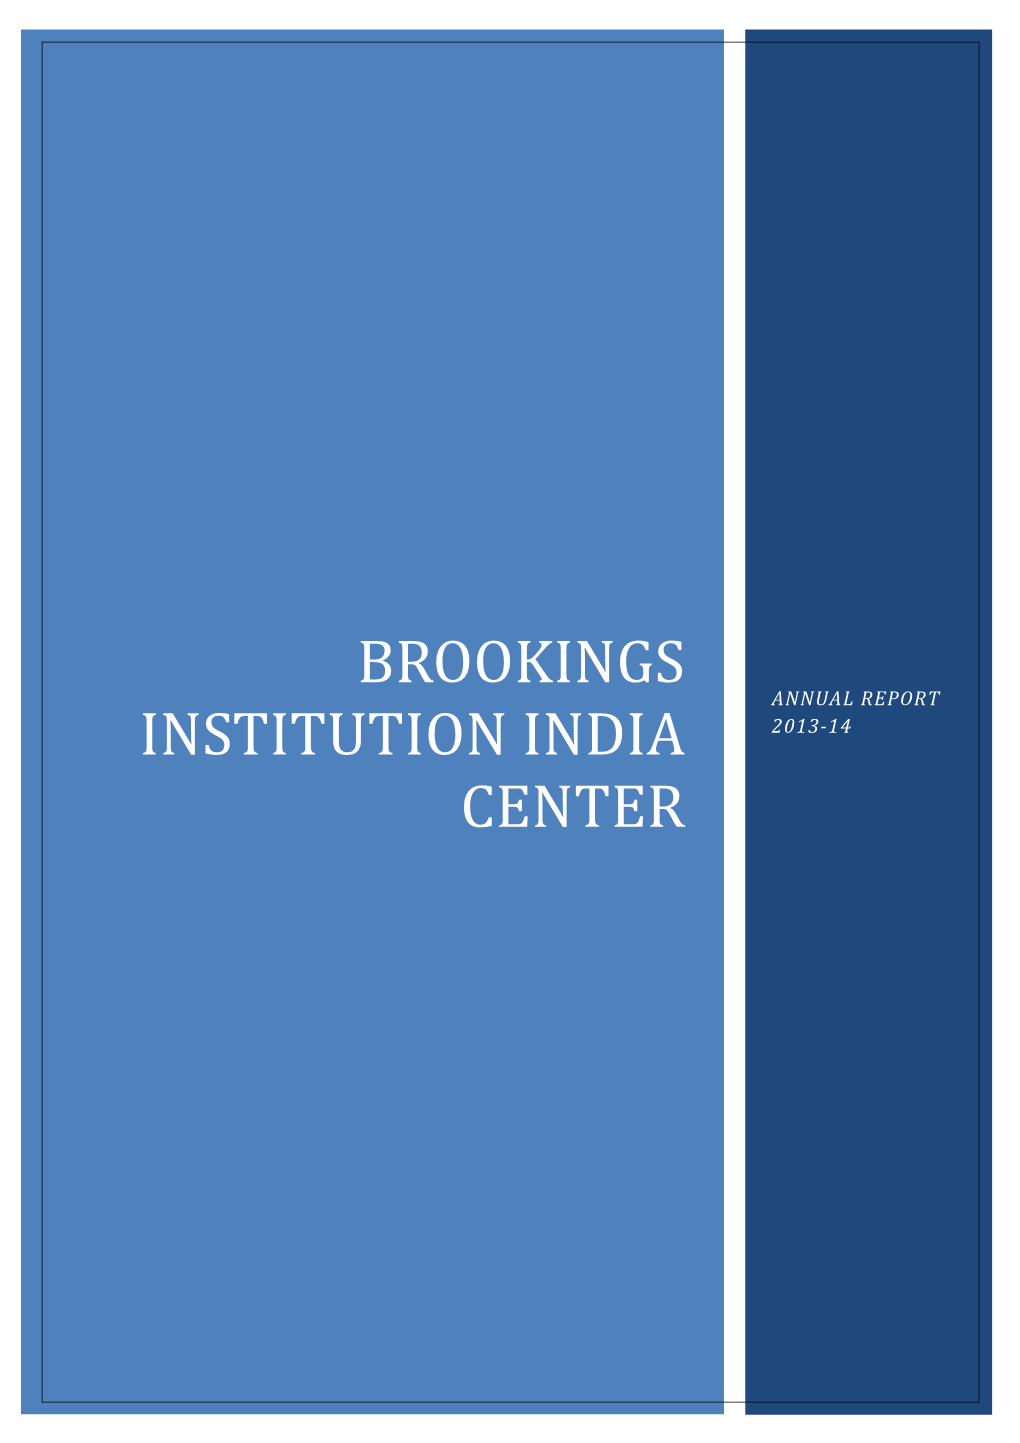 Brookings Institution India Center Is a Not-For-Profit Research Organization Registered in the State of NCT of Delhi Under the Section 25 Companies Act of 1956